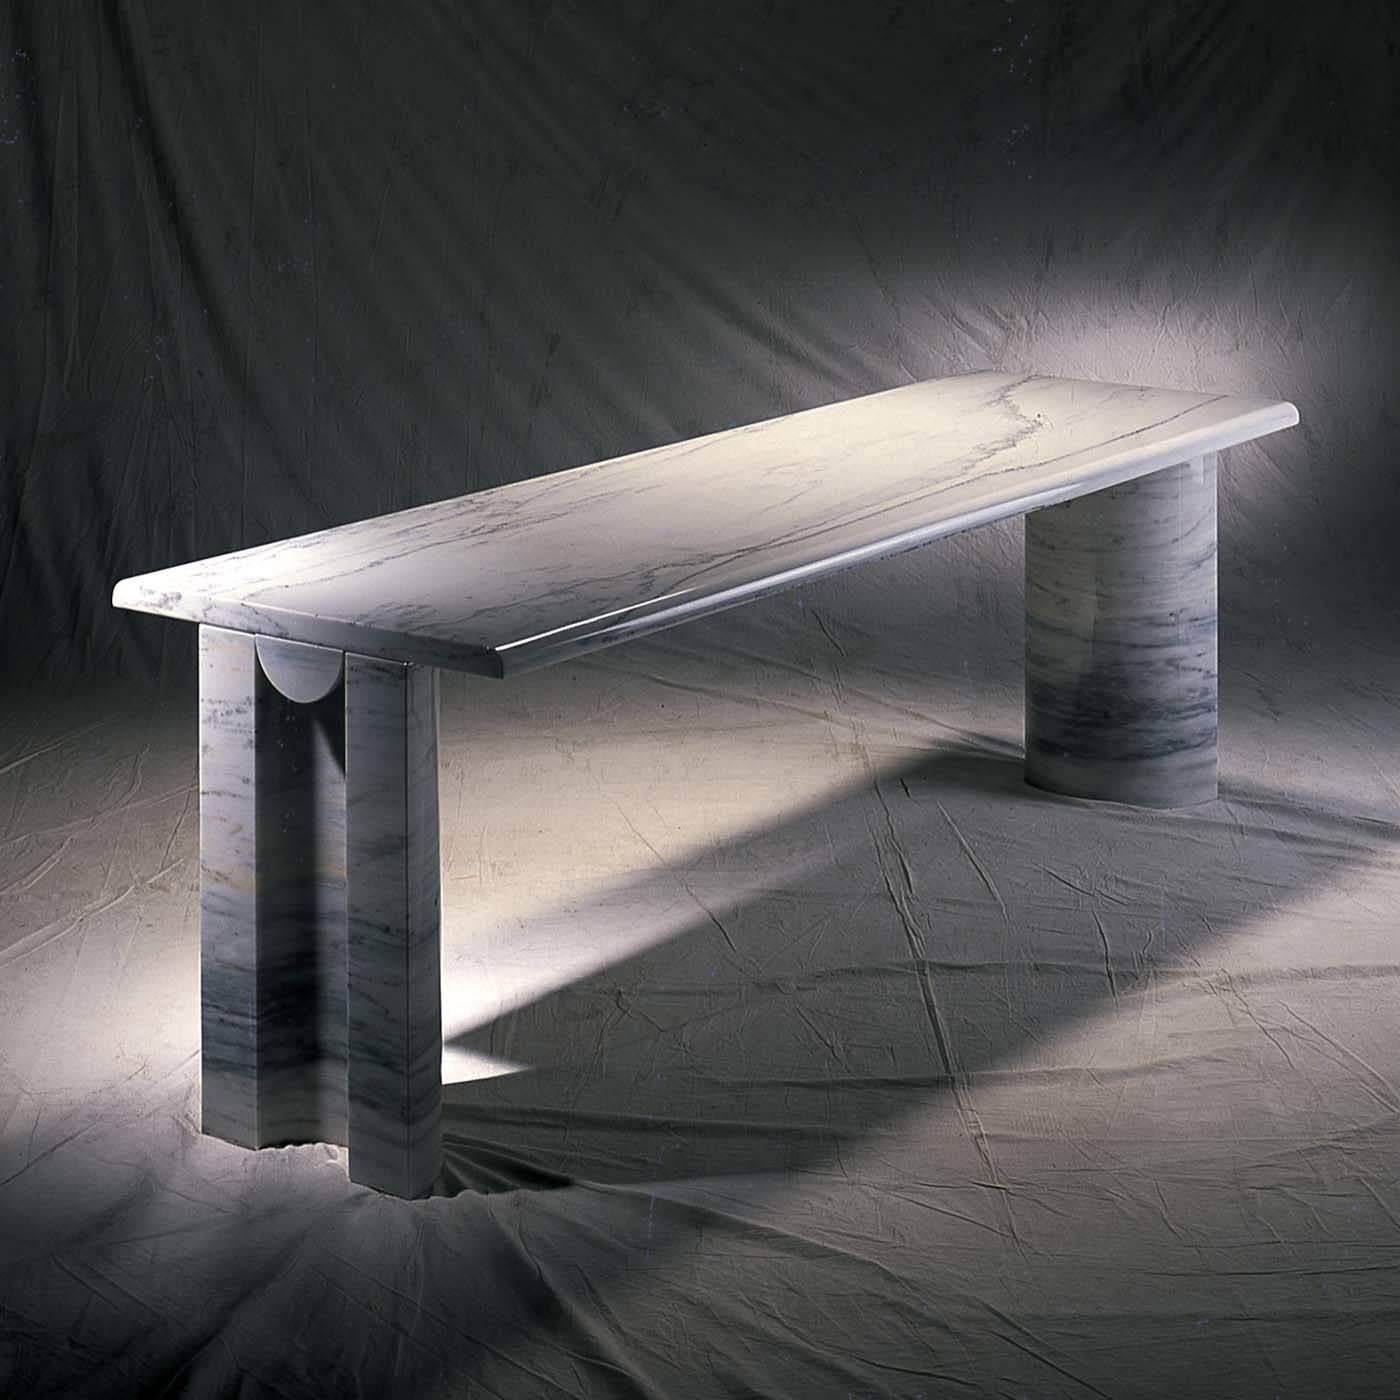 Solid units, Classic lines and the impeccable elegance are the features of this exclusive table that reflect a timeless style. The marble is showcased in all its glory by the simple and open frame composed of a long, rectangular top supported by two